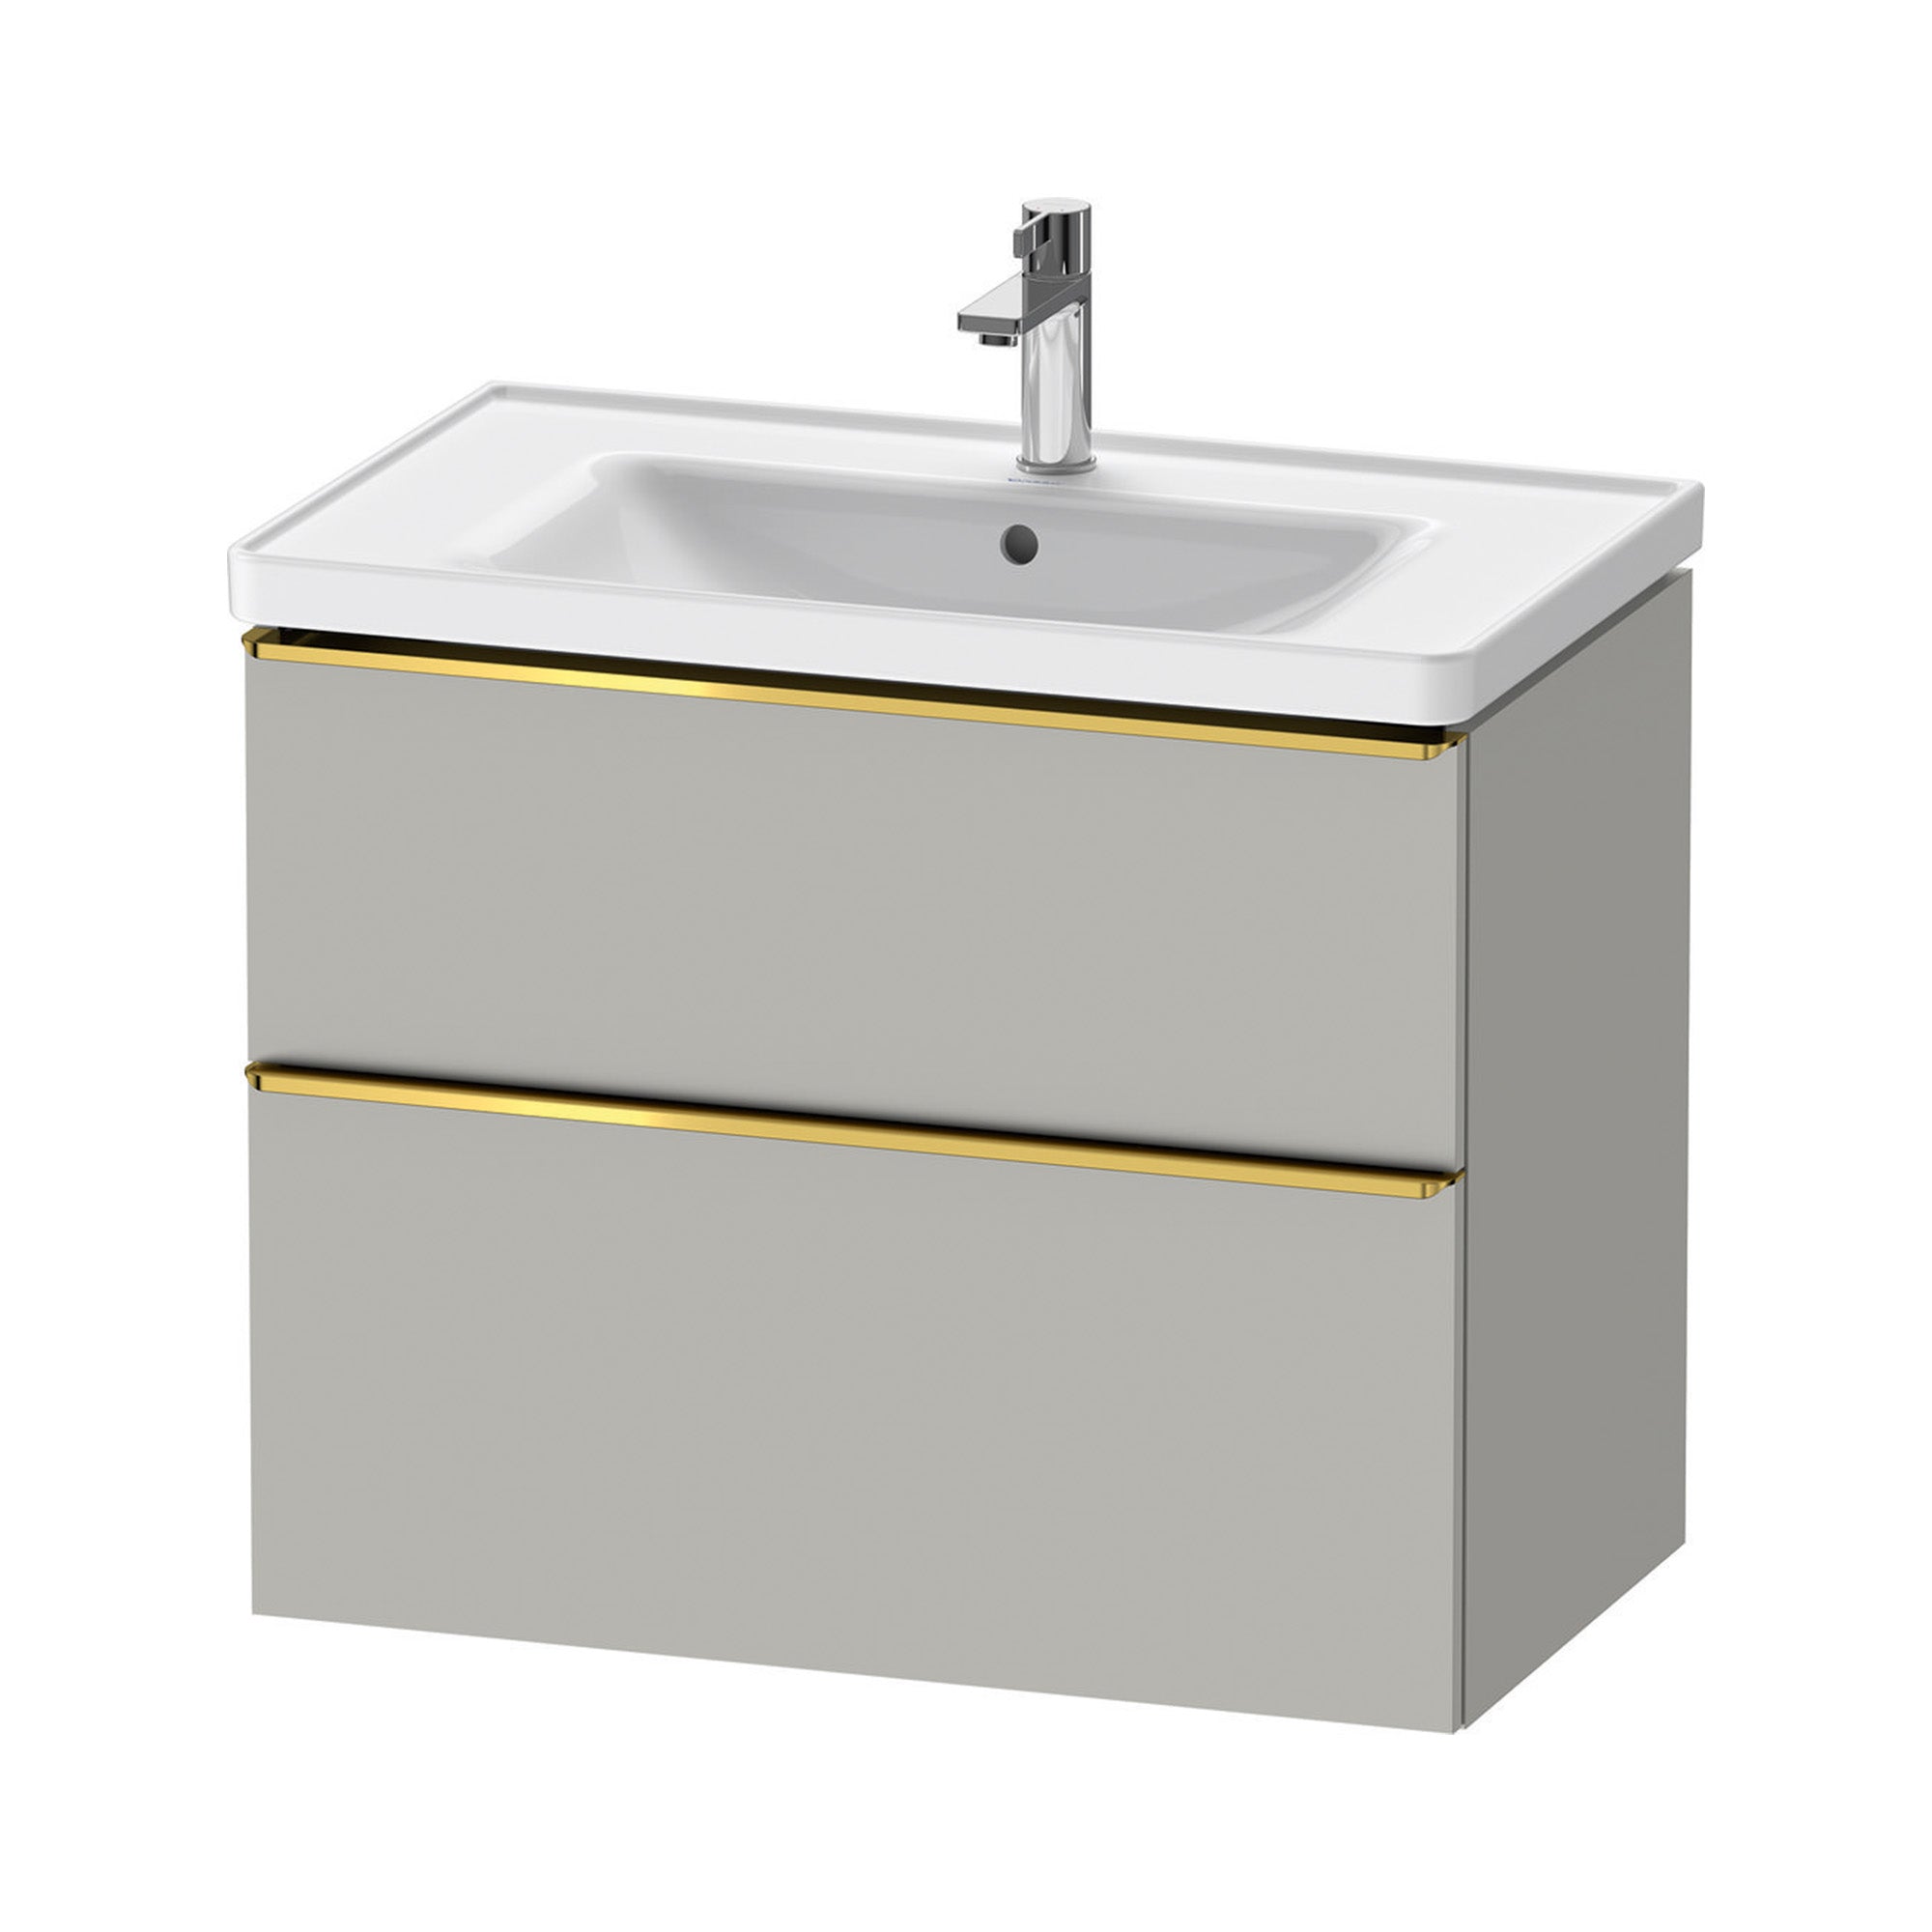 duravit d-neo 800mm wall mounted vanity unit with d-neo basin concrete grey gold handles